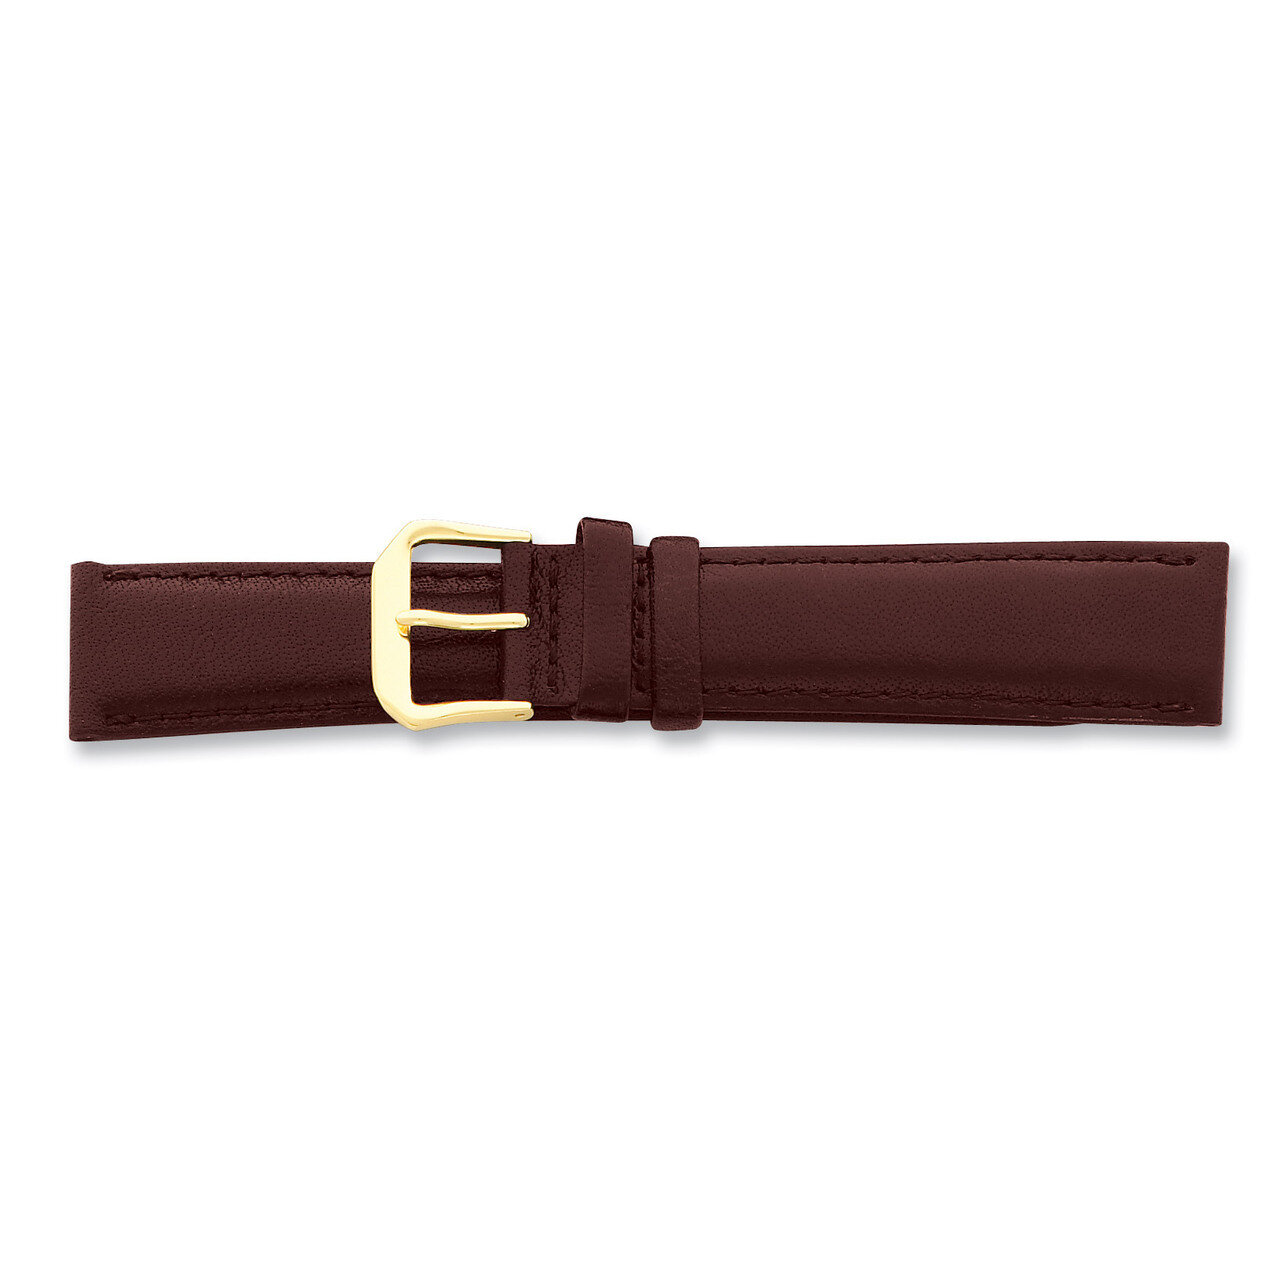 14mm Long Brown Smooth Leather Gld-tone Buckle Watch Band BA84L-14